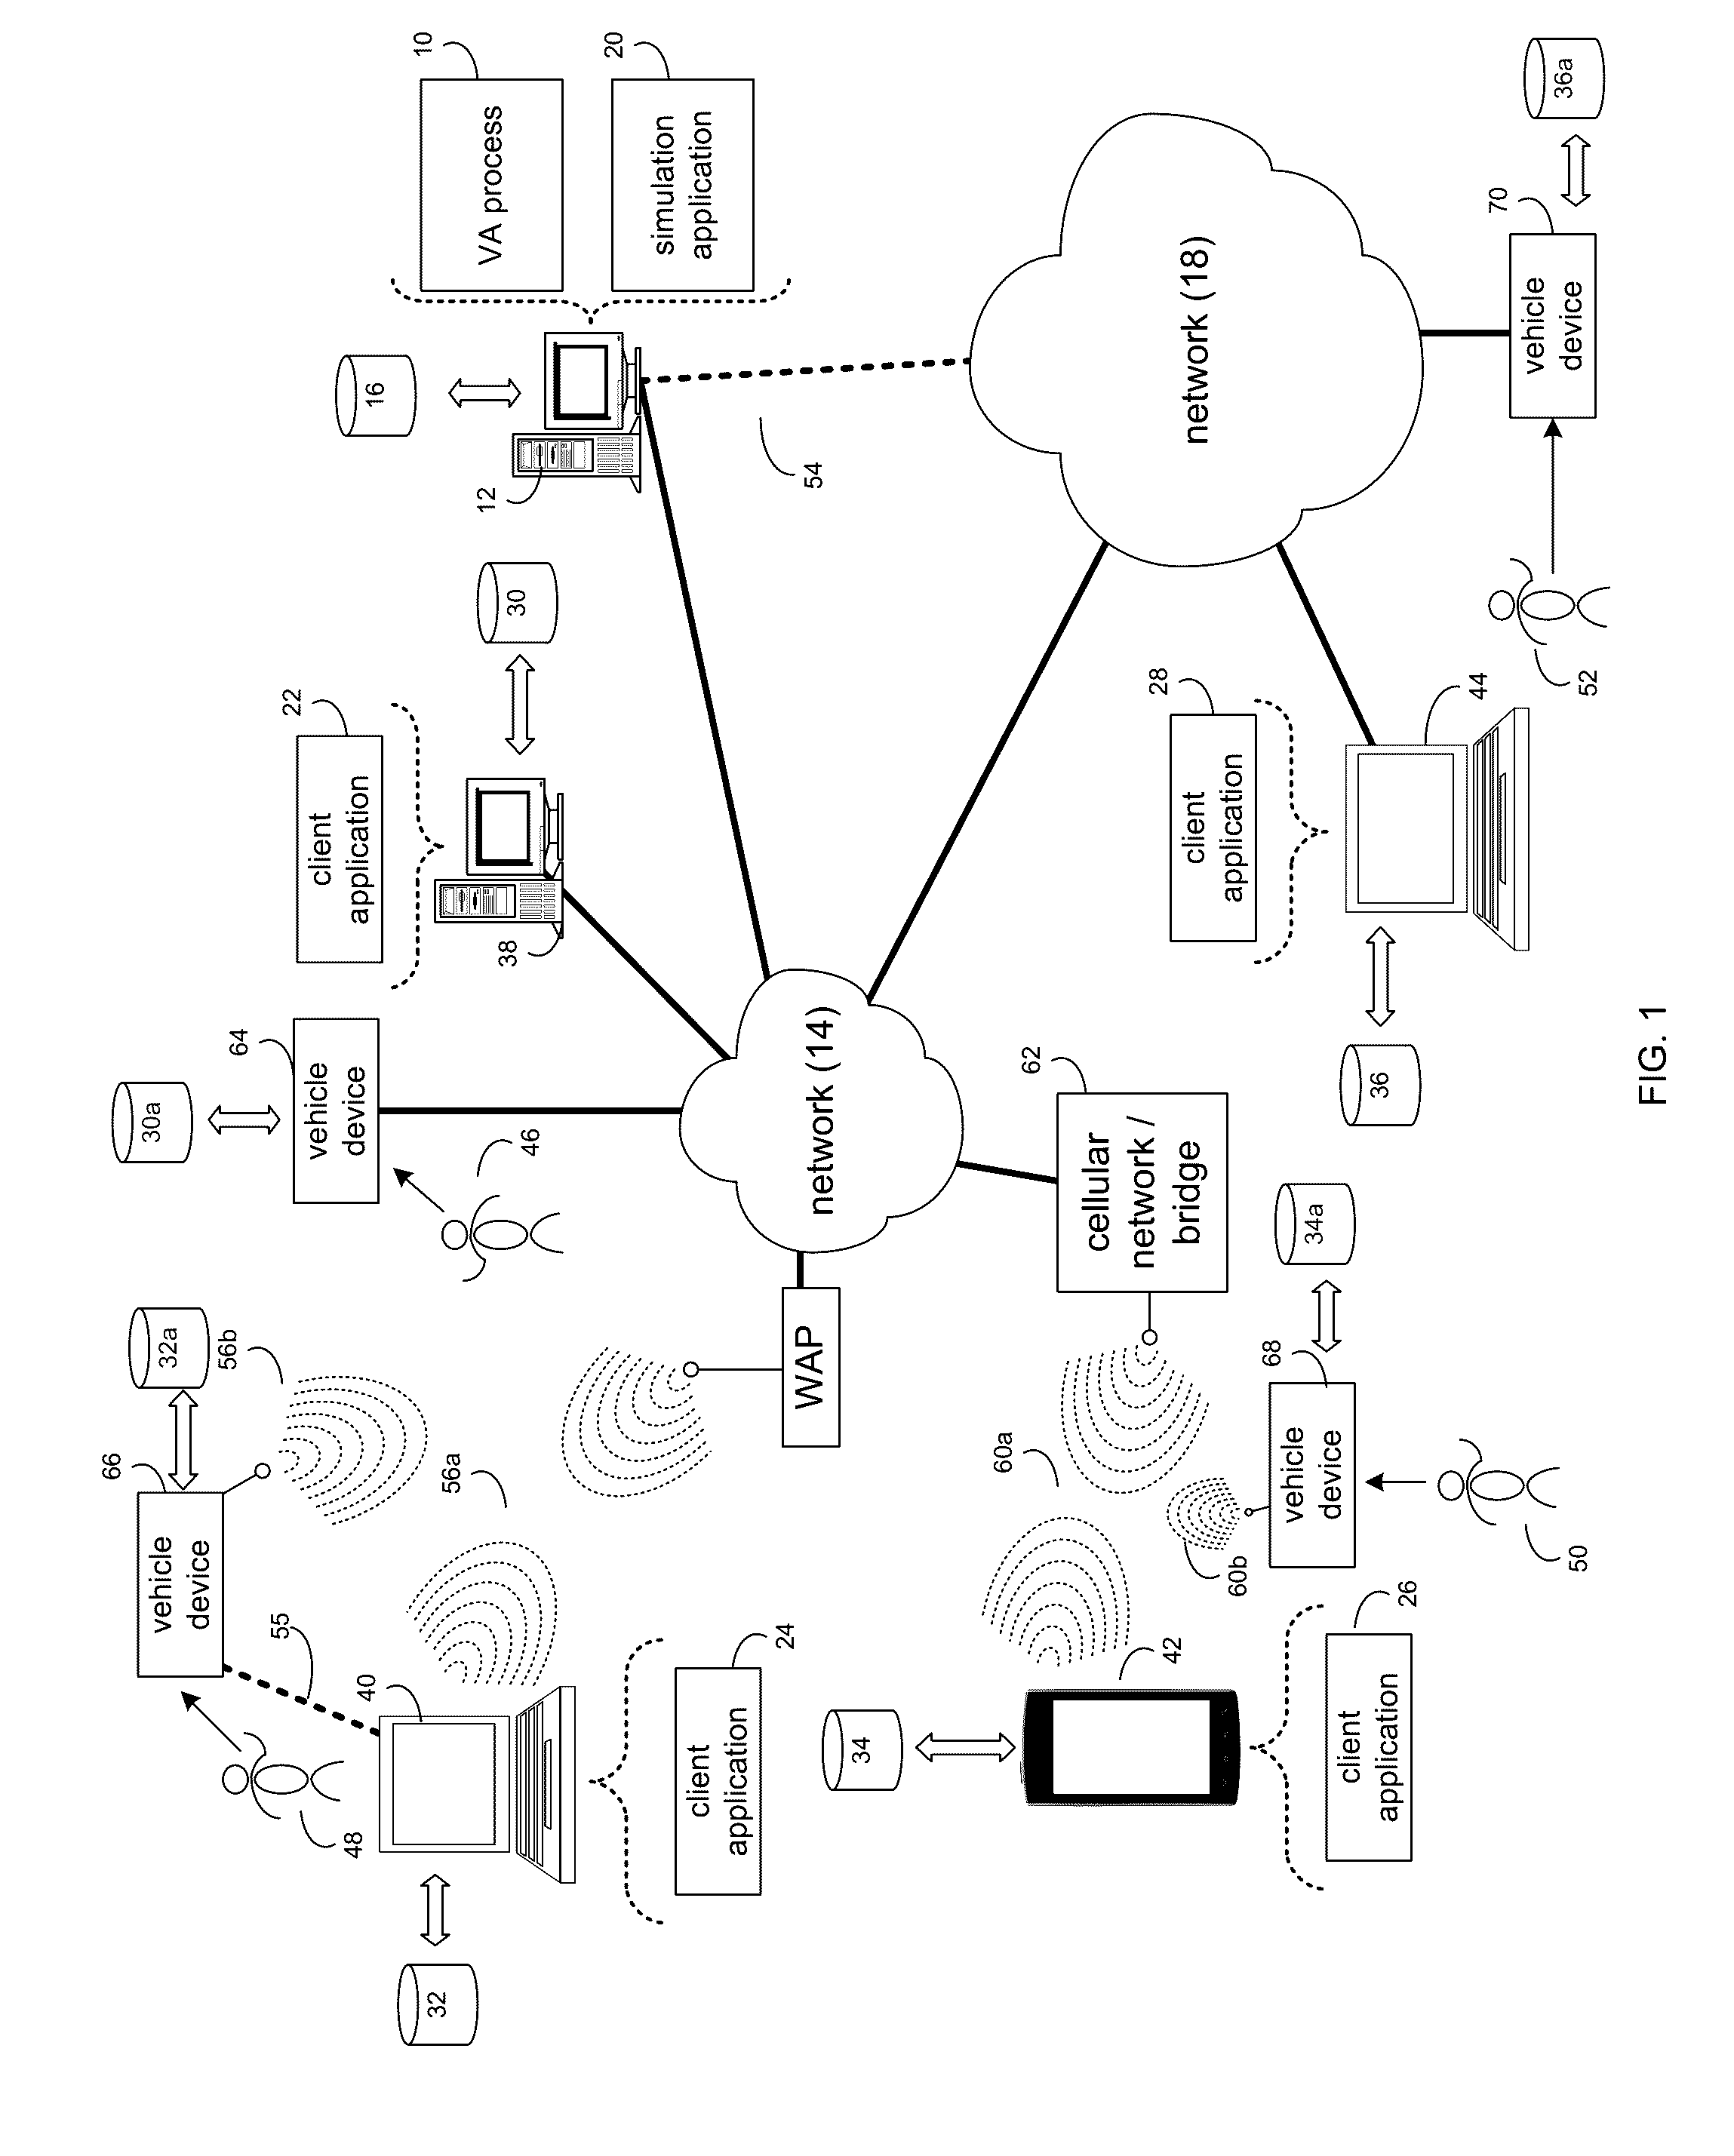 System and method for evaluation of object autonomy